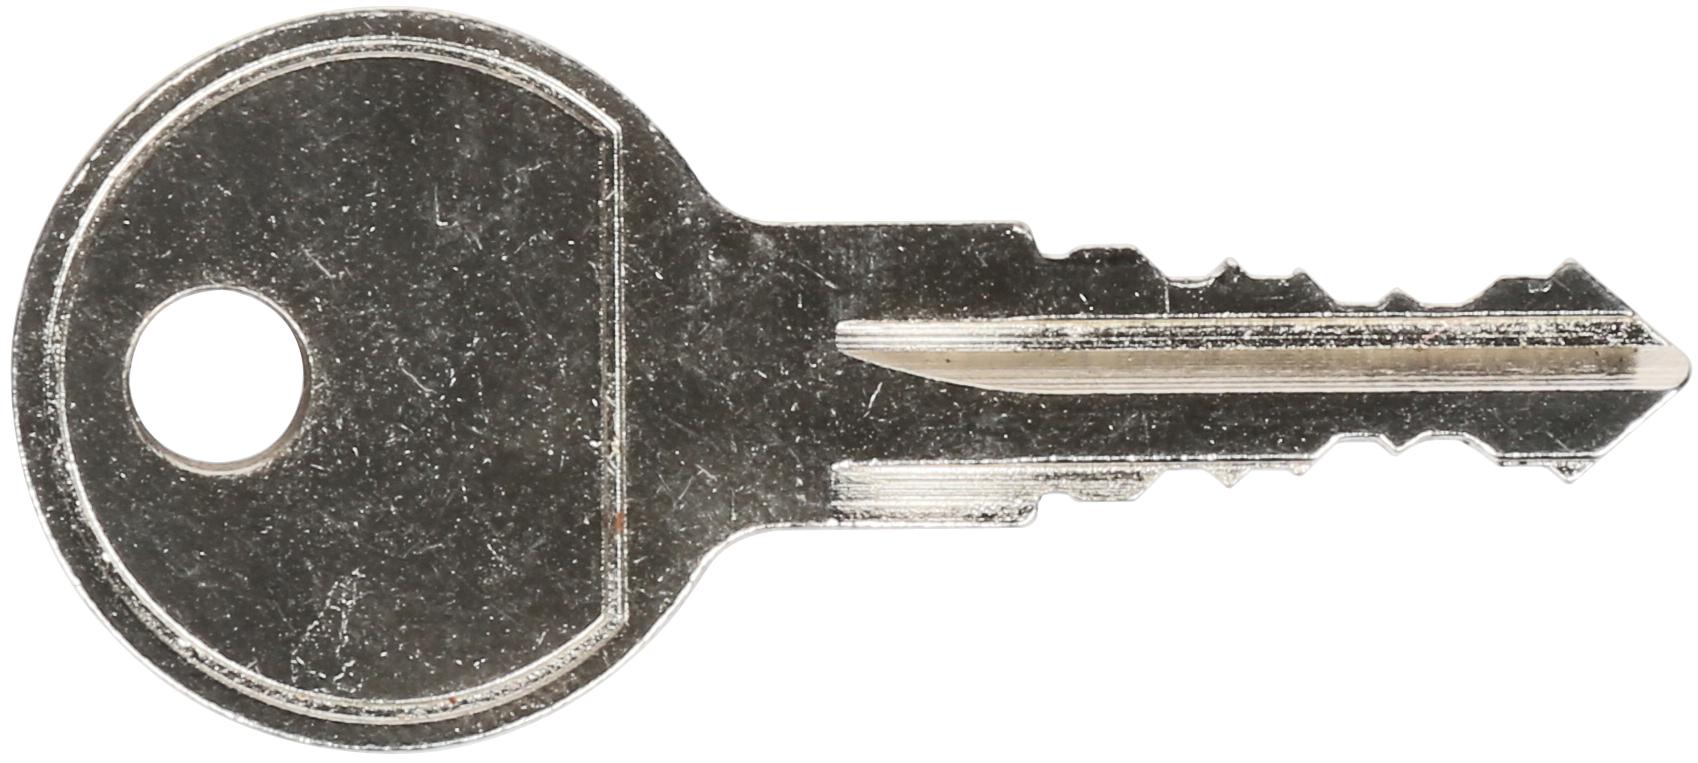 Spare Roof Box Key 073